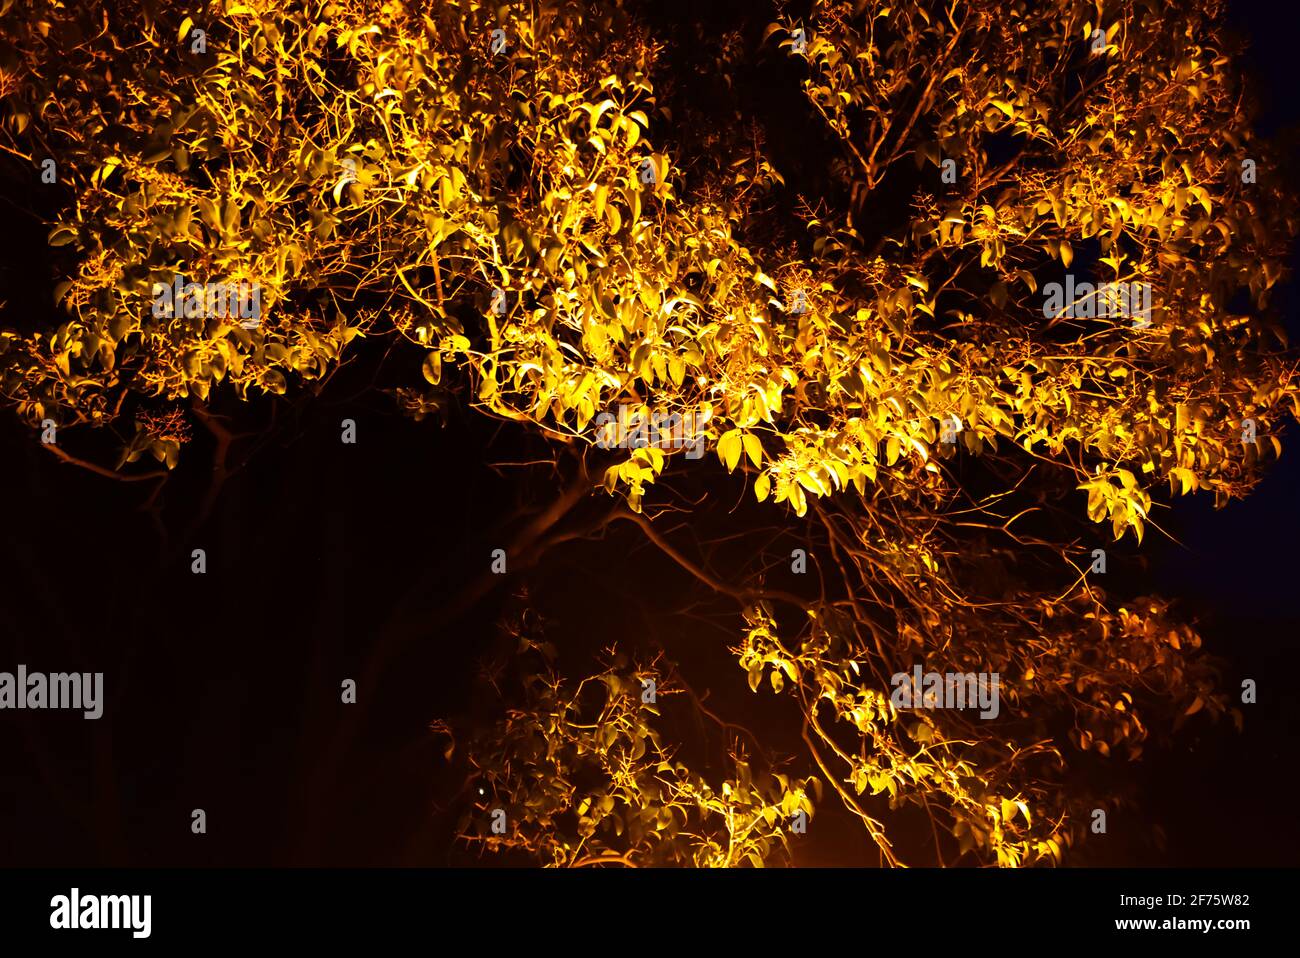 A dramatic shot of a tree lightened up from below in the night. Stock Photo